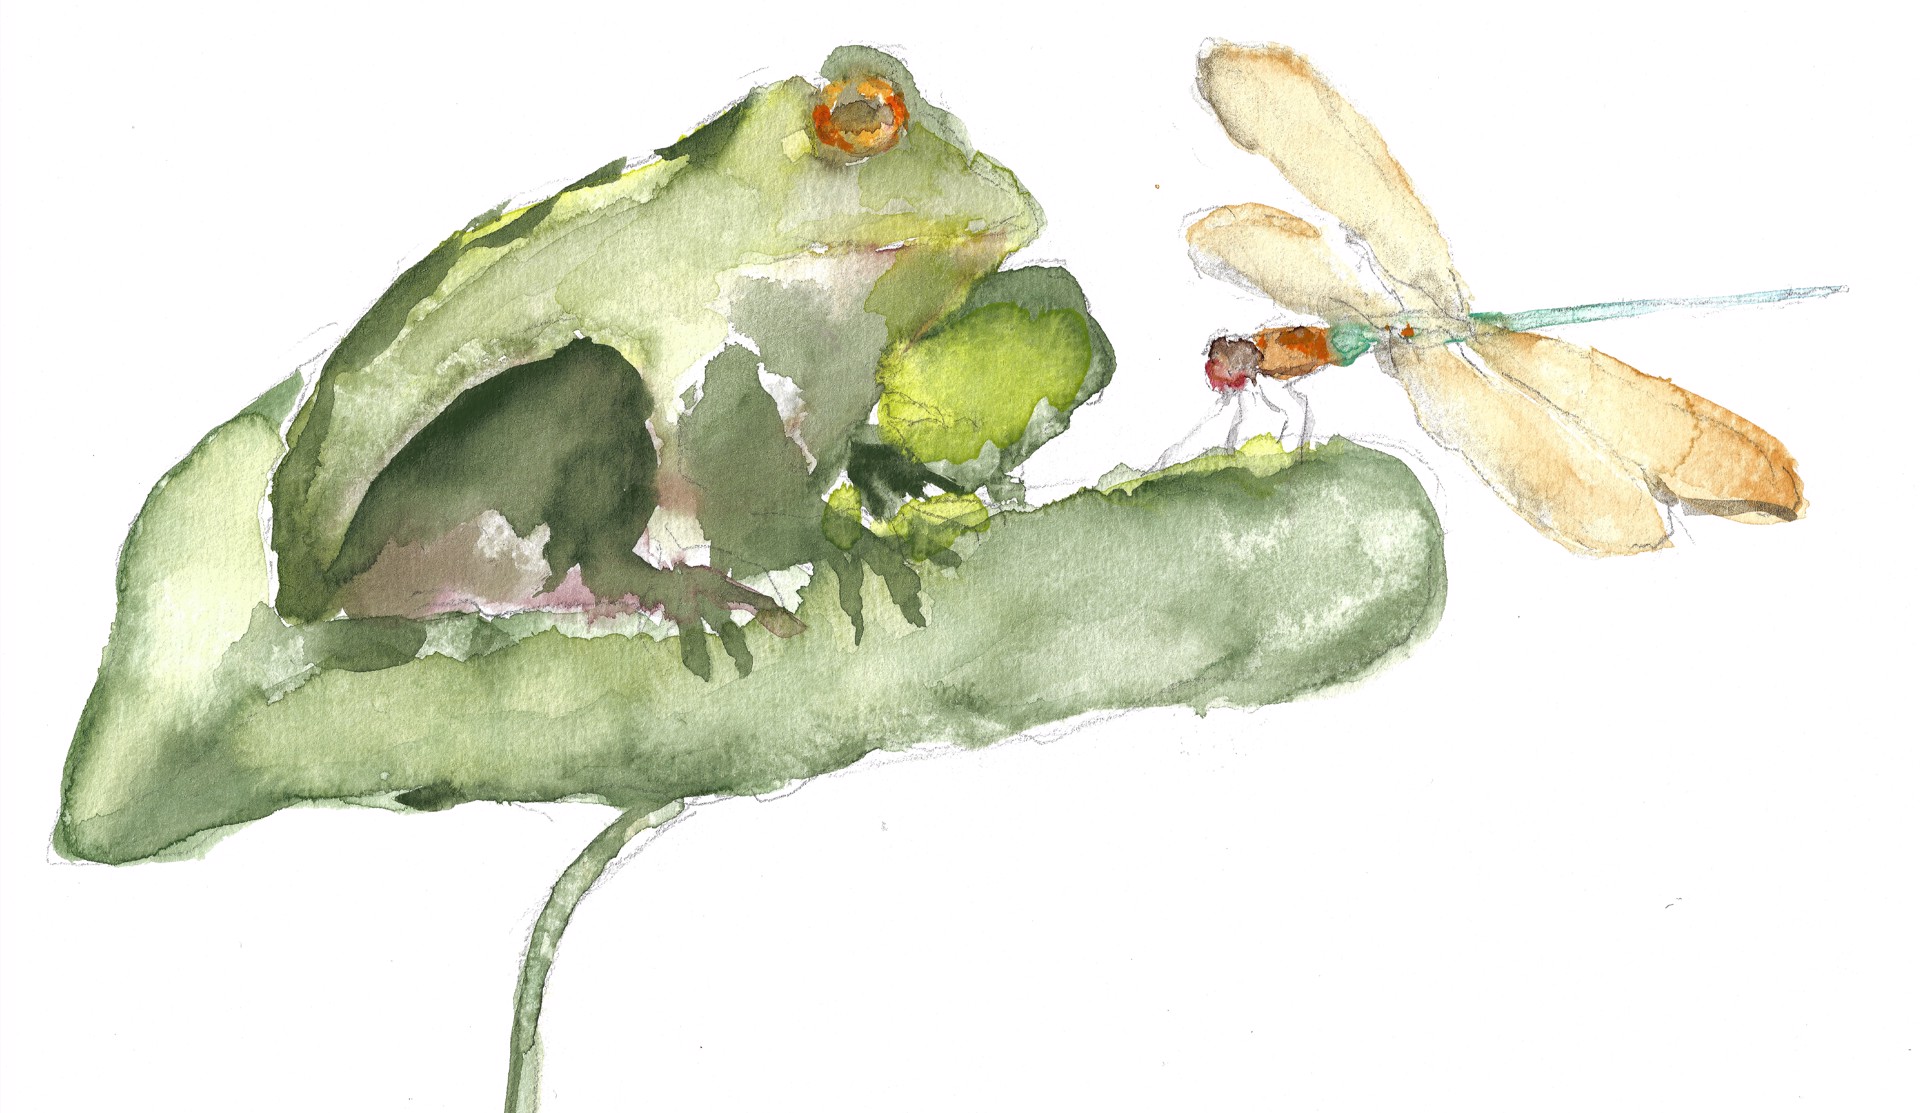 Frog with a Dragonfly Visitor by Anne Neilson